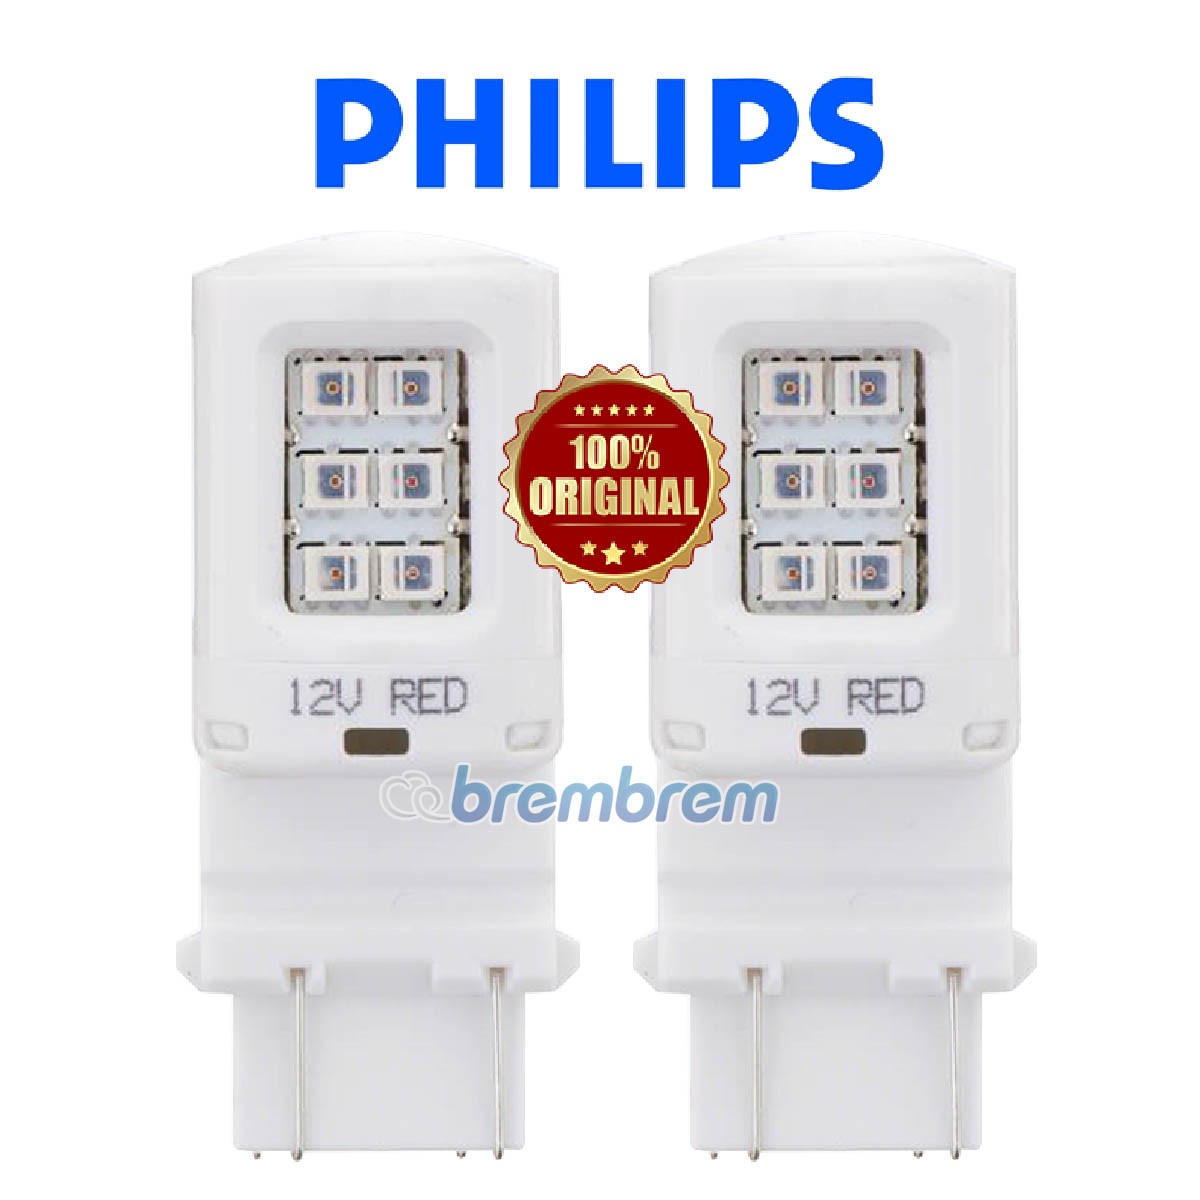 PHILIPS ULTINON T20 W21/5W RED - LAMPU LED